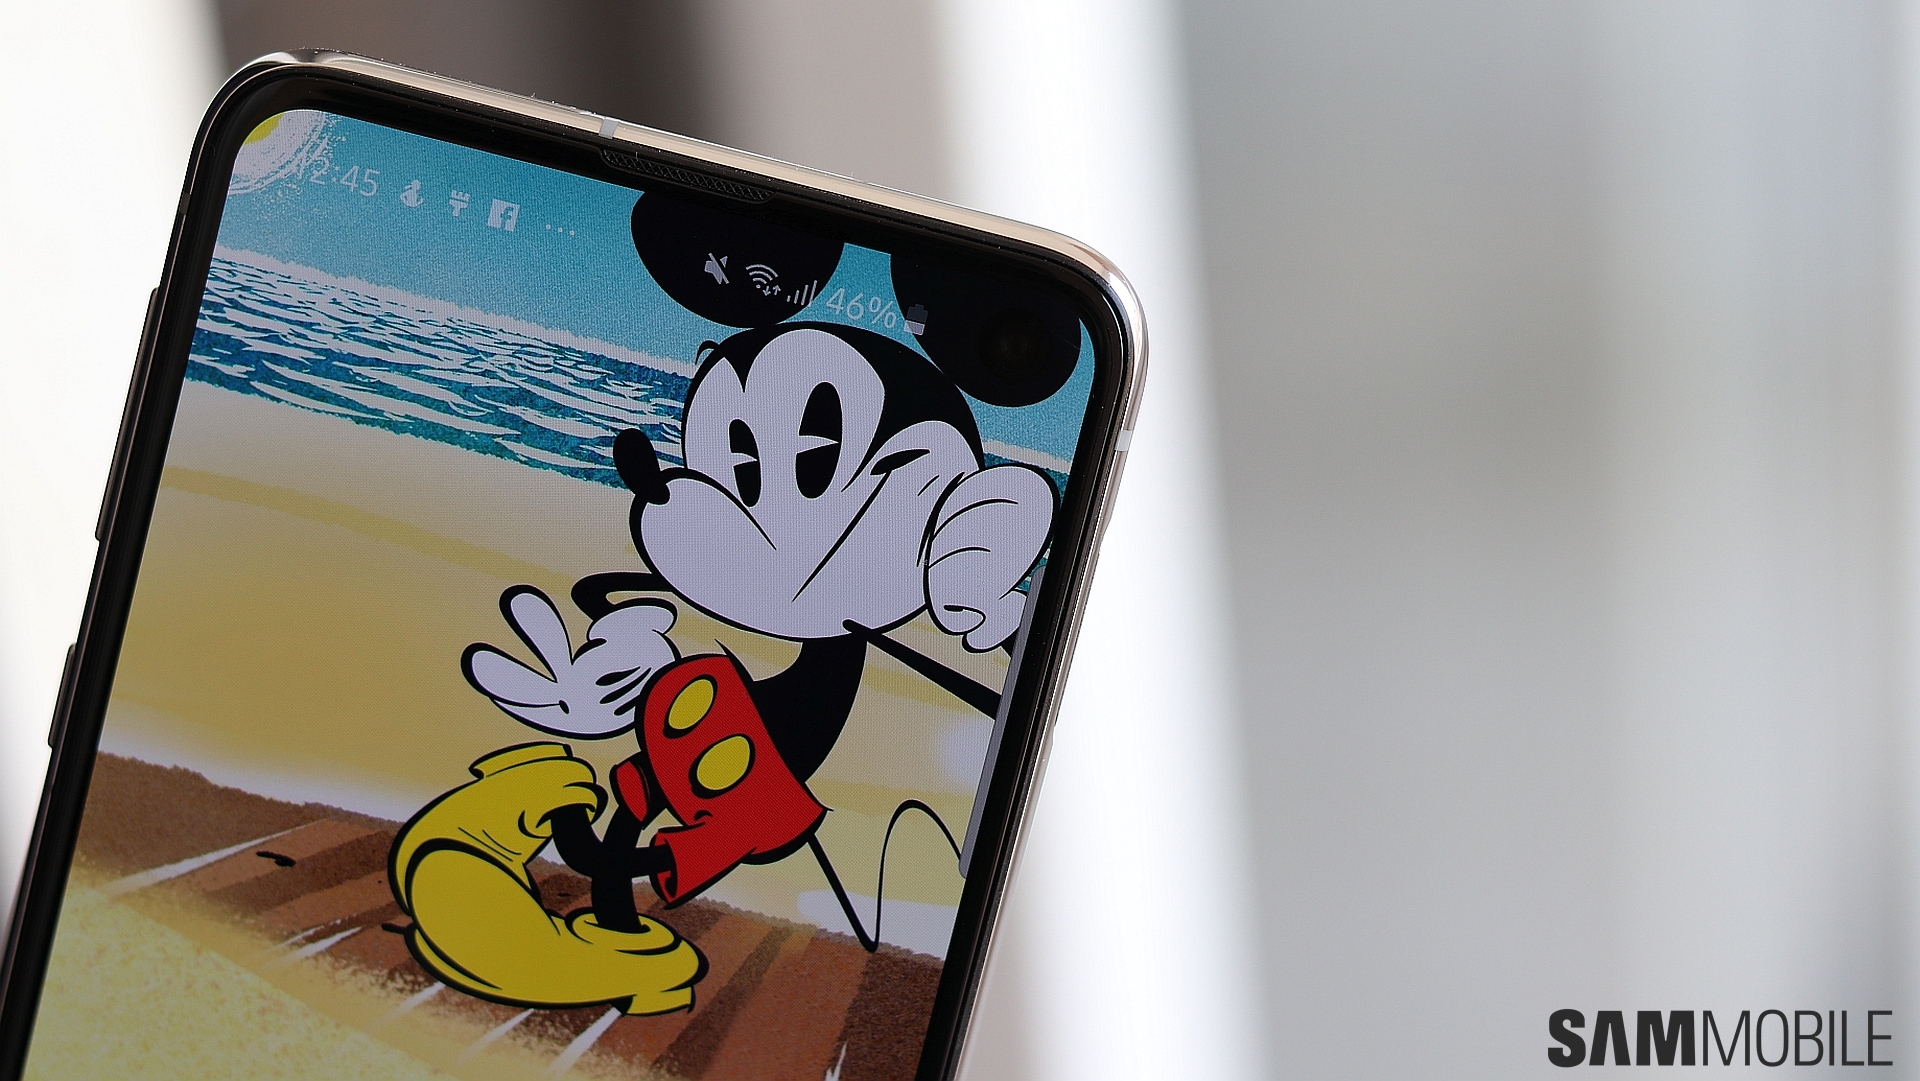 Hide Your Galaxy S10 S Display Cutout With These Disney Wallpapers